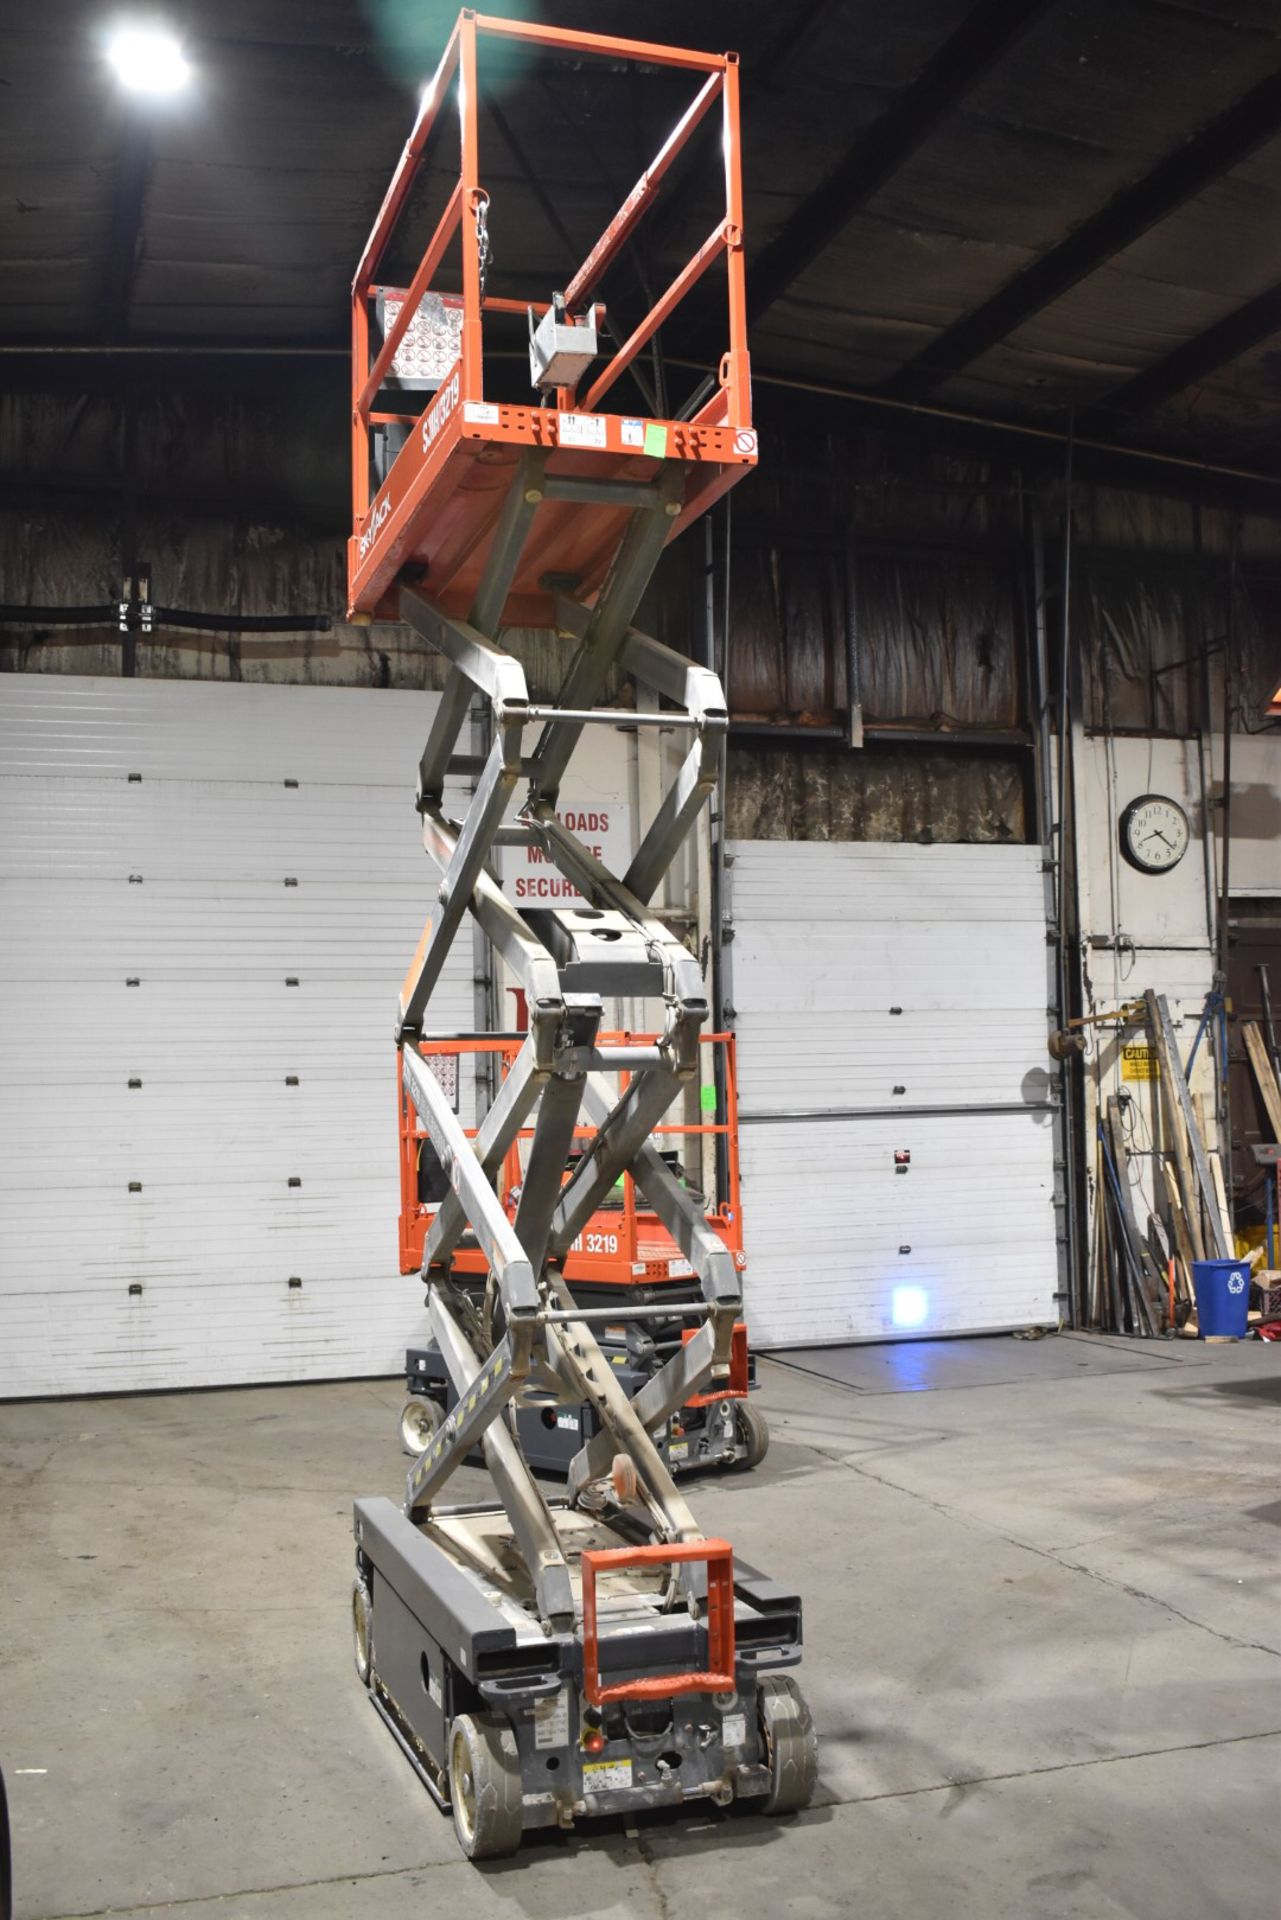 SKYJACK (2013) III 3219 ELECTRIC SCISSOR LIFT WITH 24V BATTERY, 550LBS CAPACITY, 19' MAX HEIGHT, - Image 3 of 8